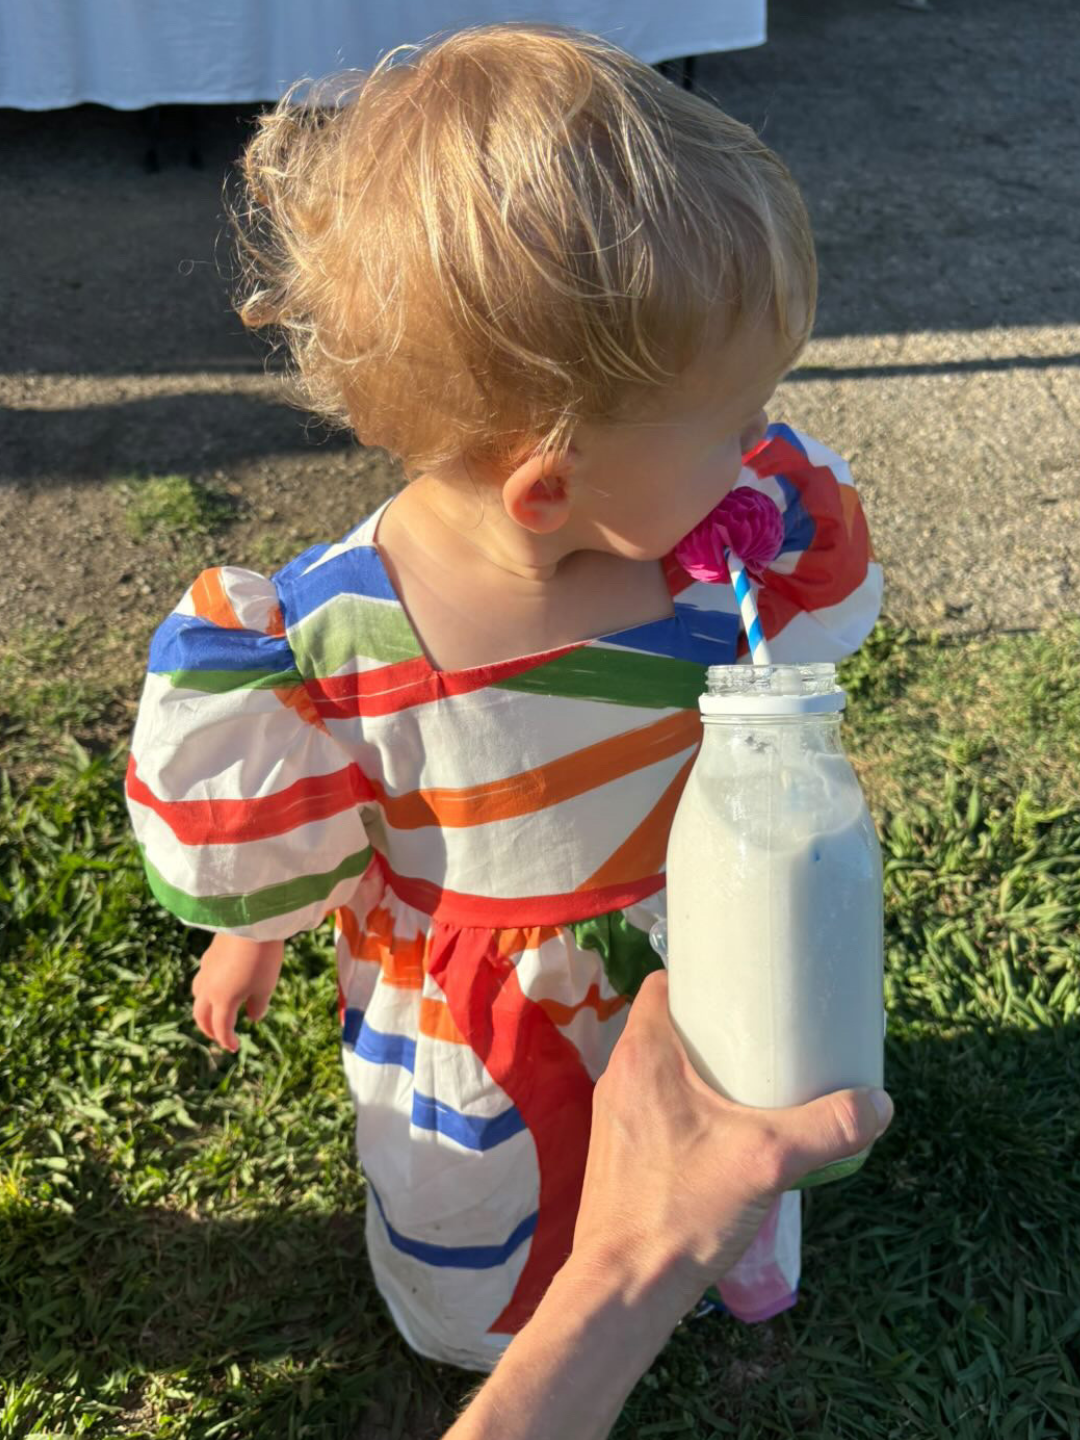 A toddler wearing the kids Glow Dress in colors featuring paintbrush-style lines of bold color all over a white cotton dress. She is drinking milk from a bottle with a straw, held by an adult's hand, and standing on grass looking away from camera.